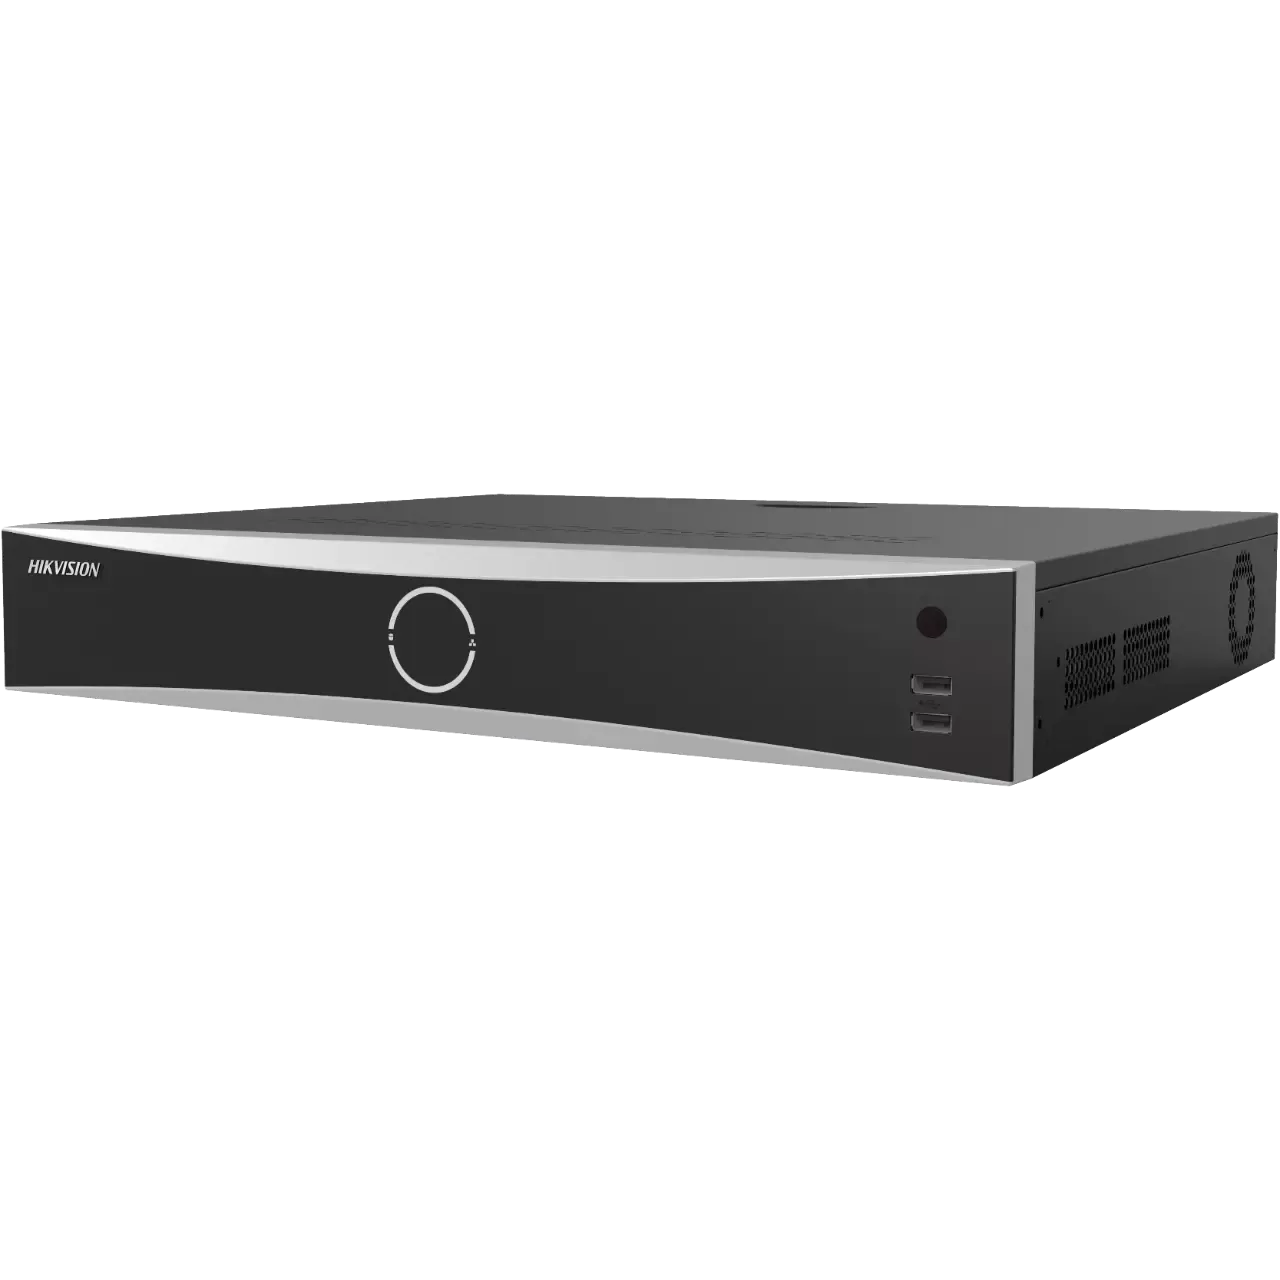 Nvr hikvision ds-7716nxi-i4/s(c) 16 canale